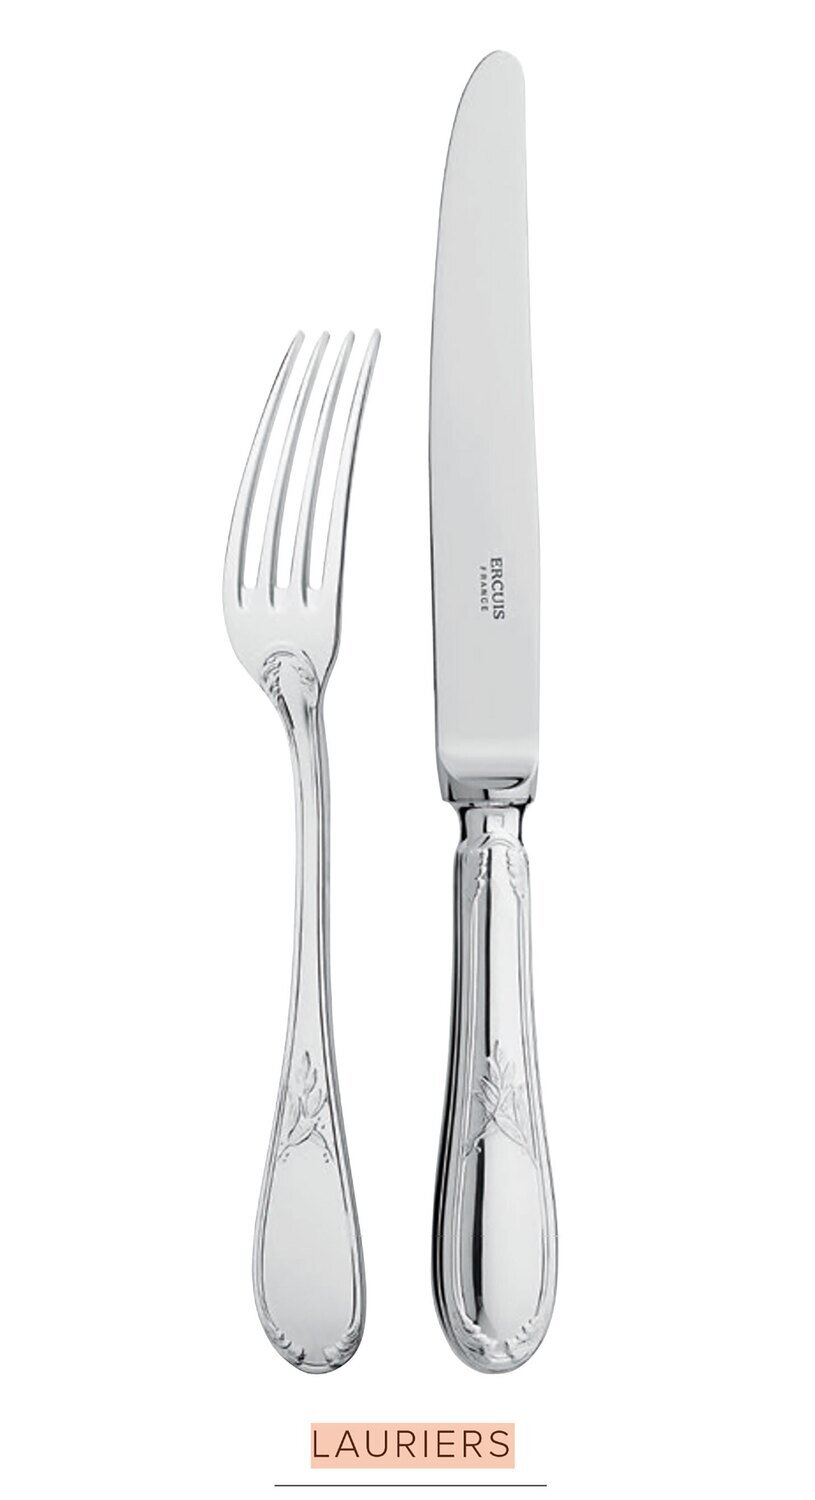 Ercuis Lauriers Sugar Tongs Silver Plated F650460-62